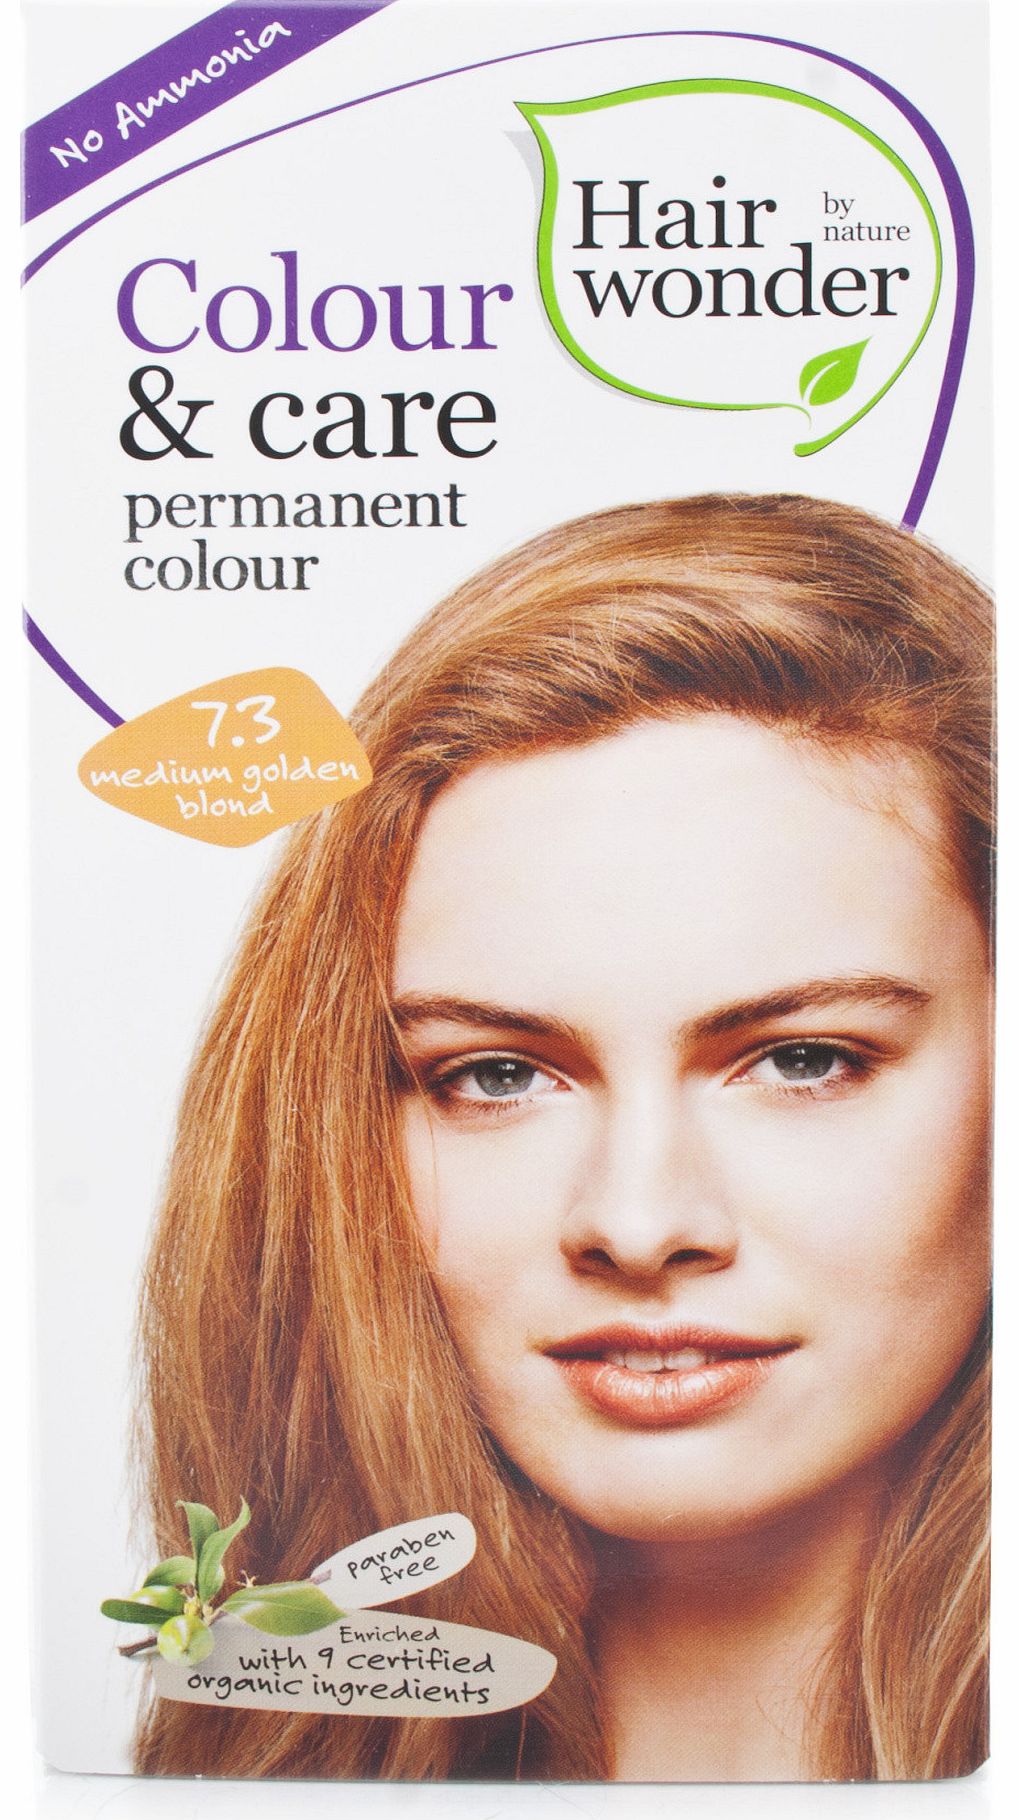 Hair Wonder Colour and Care Medium Golden Blond 7.3 provides better grey coverage and colour stays longer (for at least 6-8 weeks). The cream formulation makes application easy and also leaves fewer residues on the scalp. This ammonia free, permanent